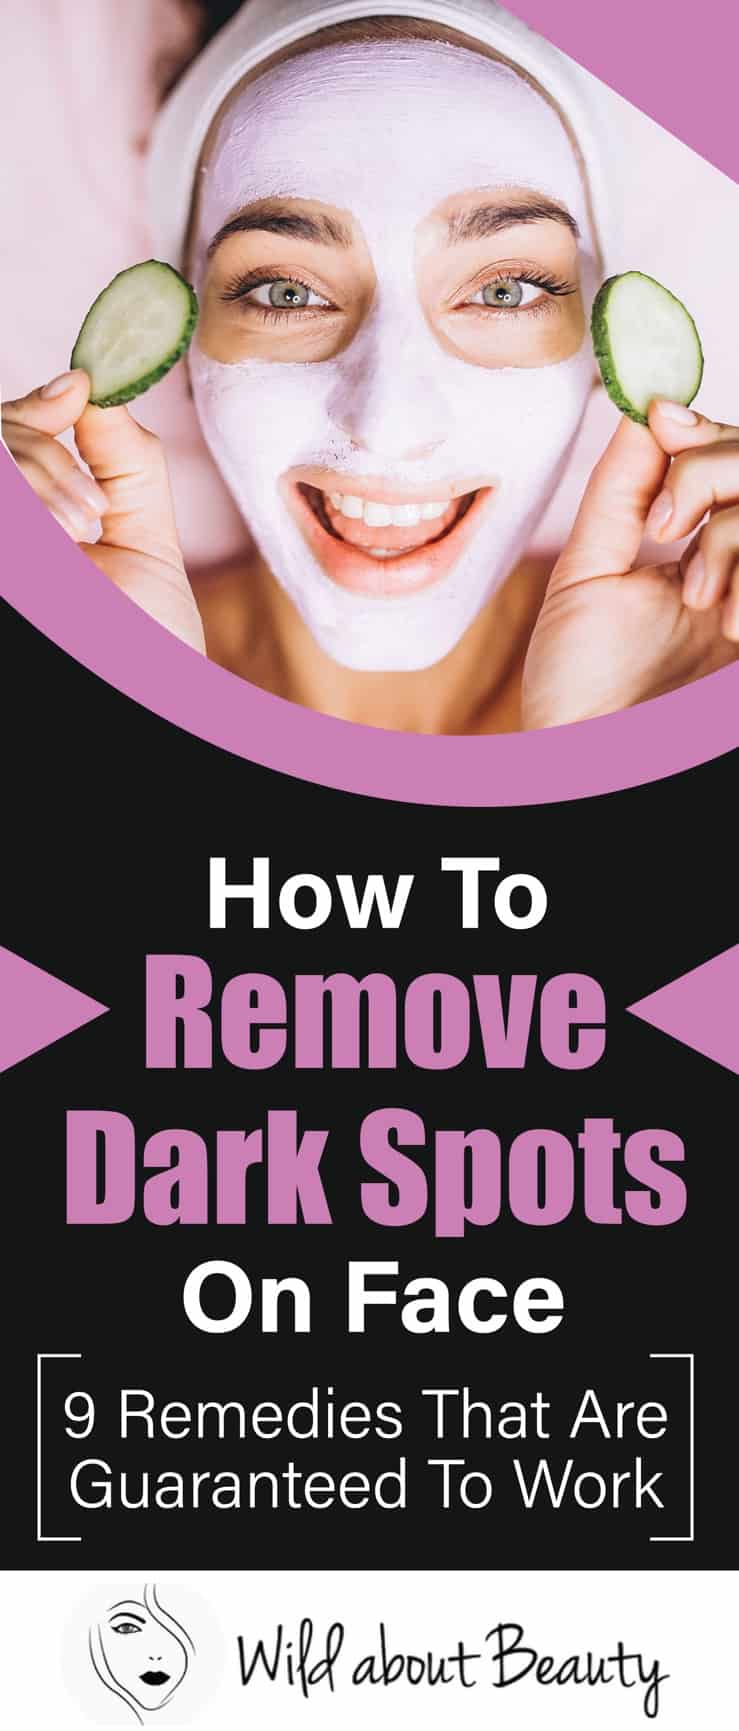 How To Remove Dark Spots On Face